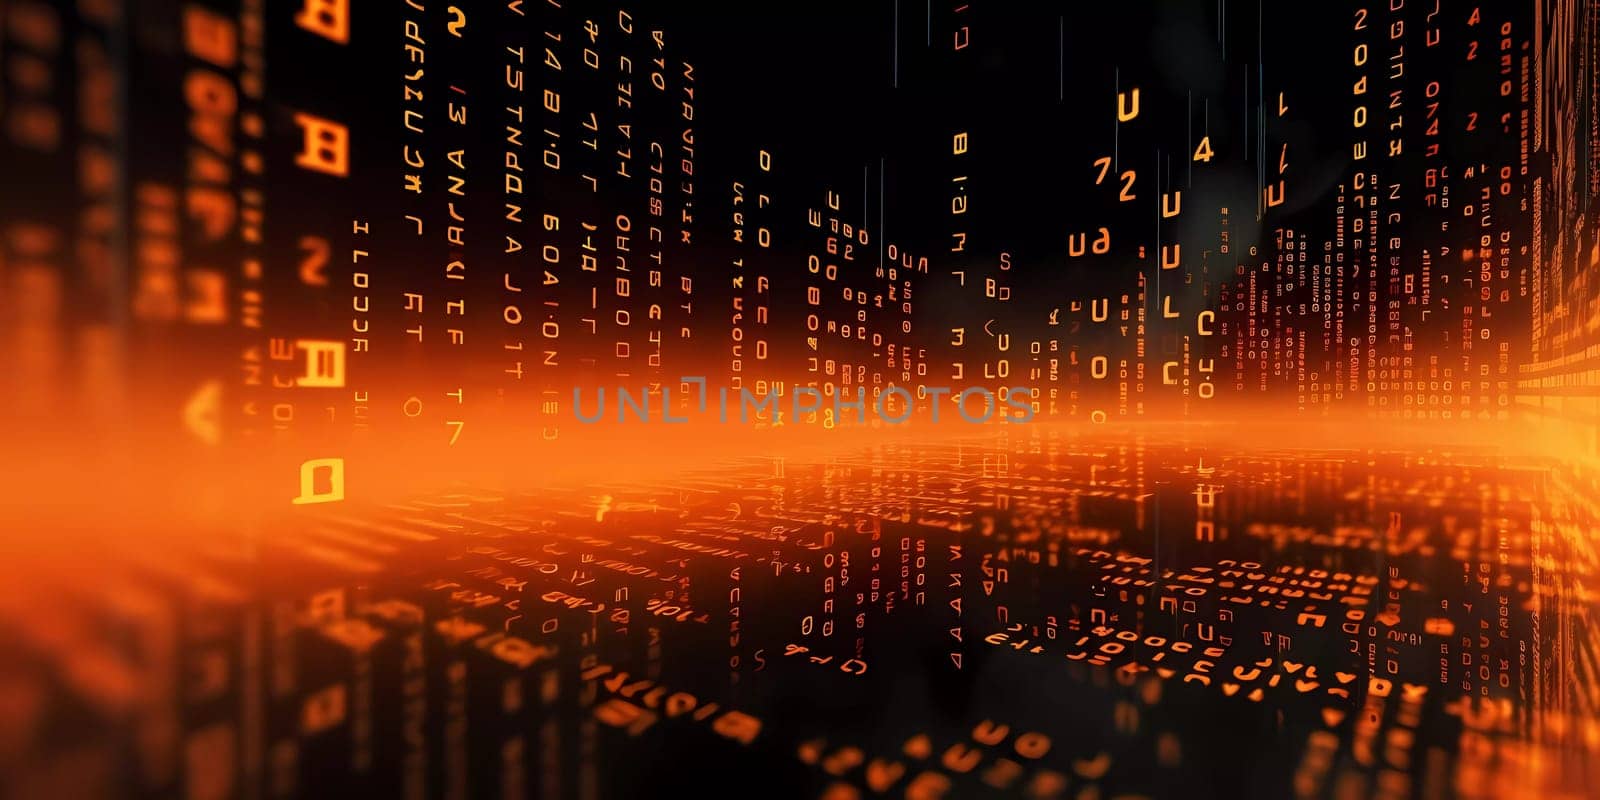 Computer background with orange digits and symbols on a black background